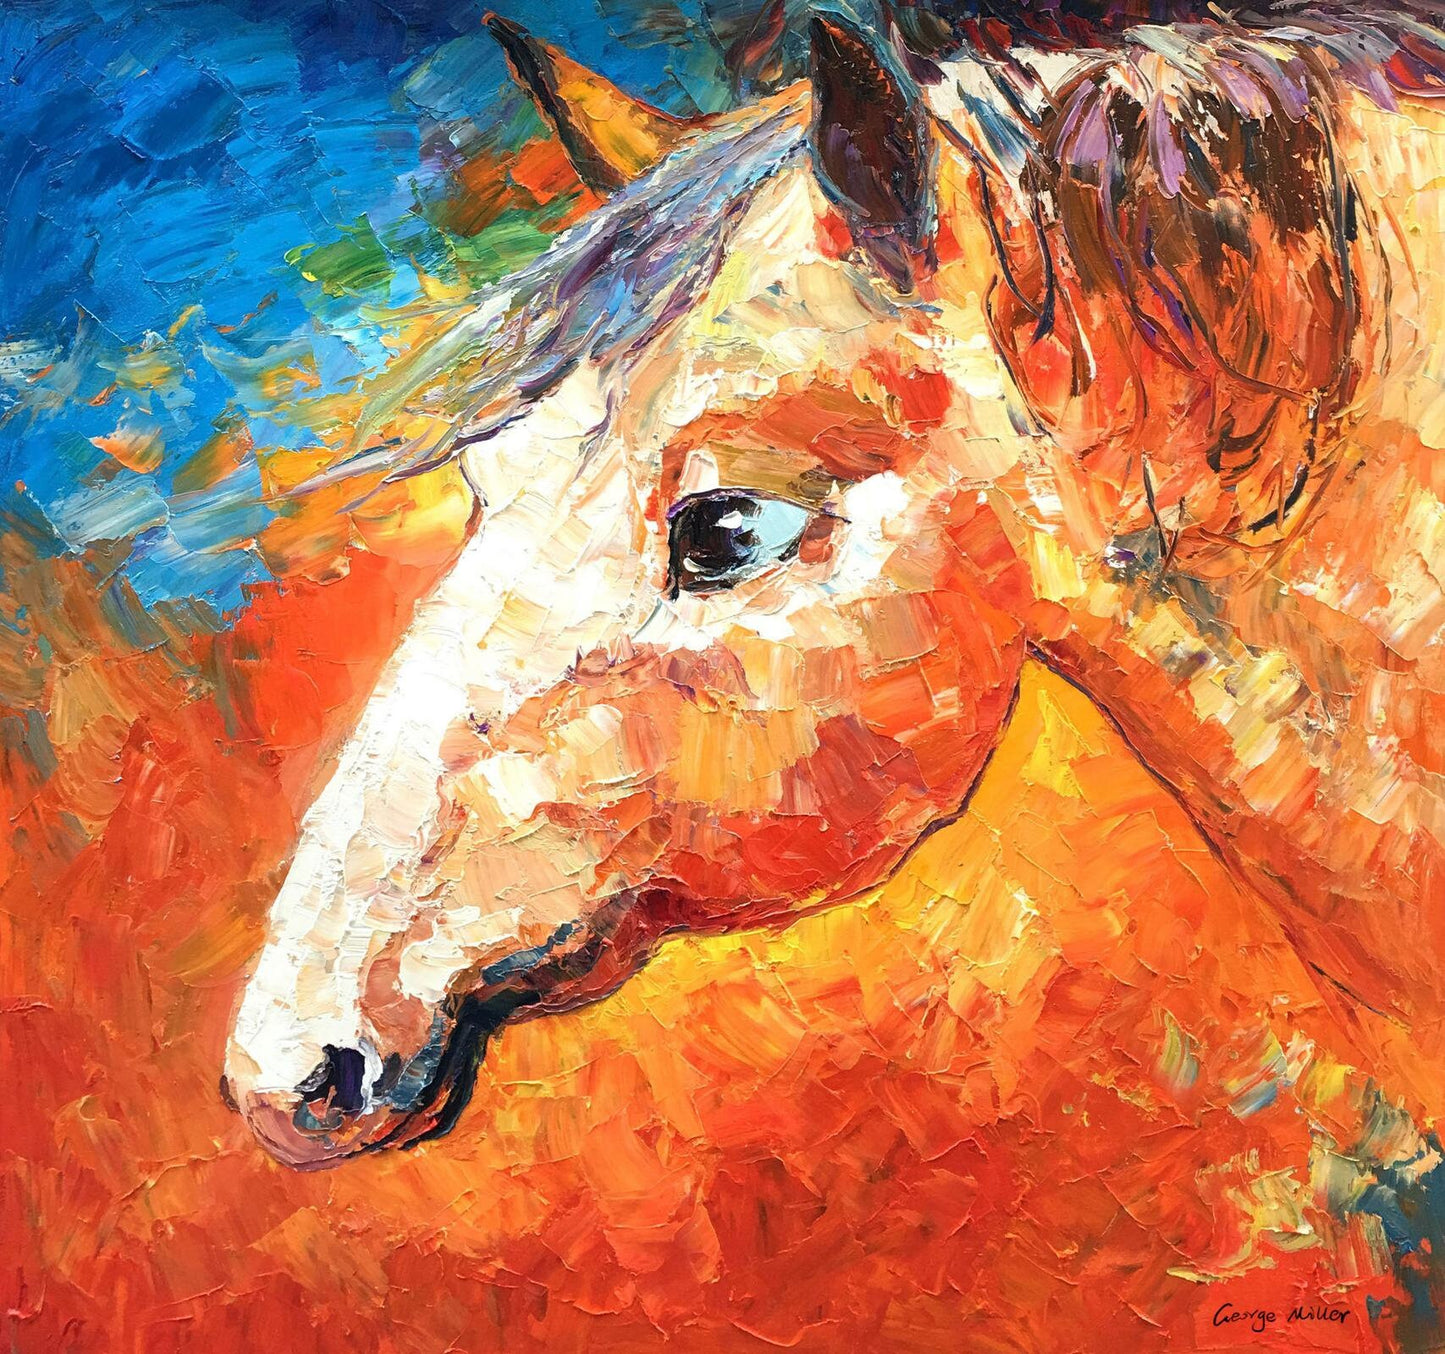 Oil Painting Horse, Contemporary Wall Art, Canvas Painting, Wall Decor, Modern Painting, Horse Wall Art, Original Art, Large Oil Painting